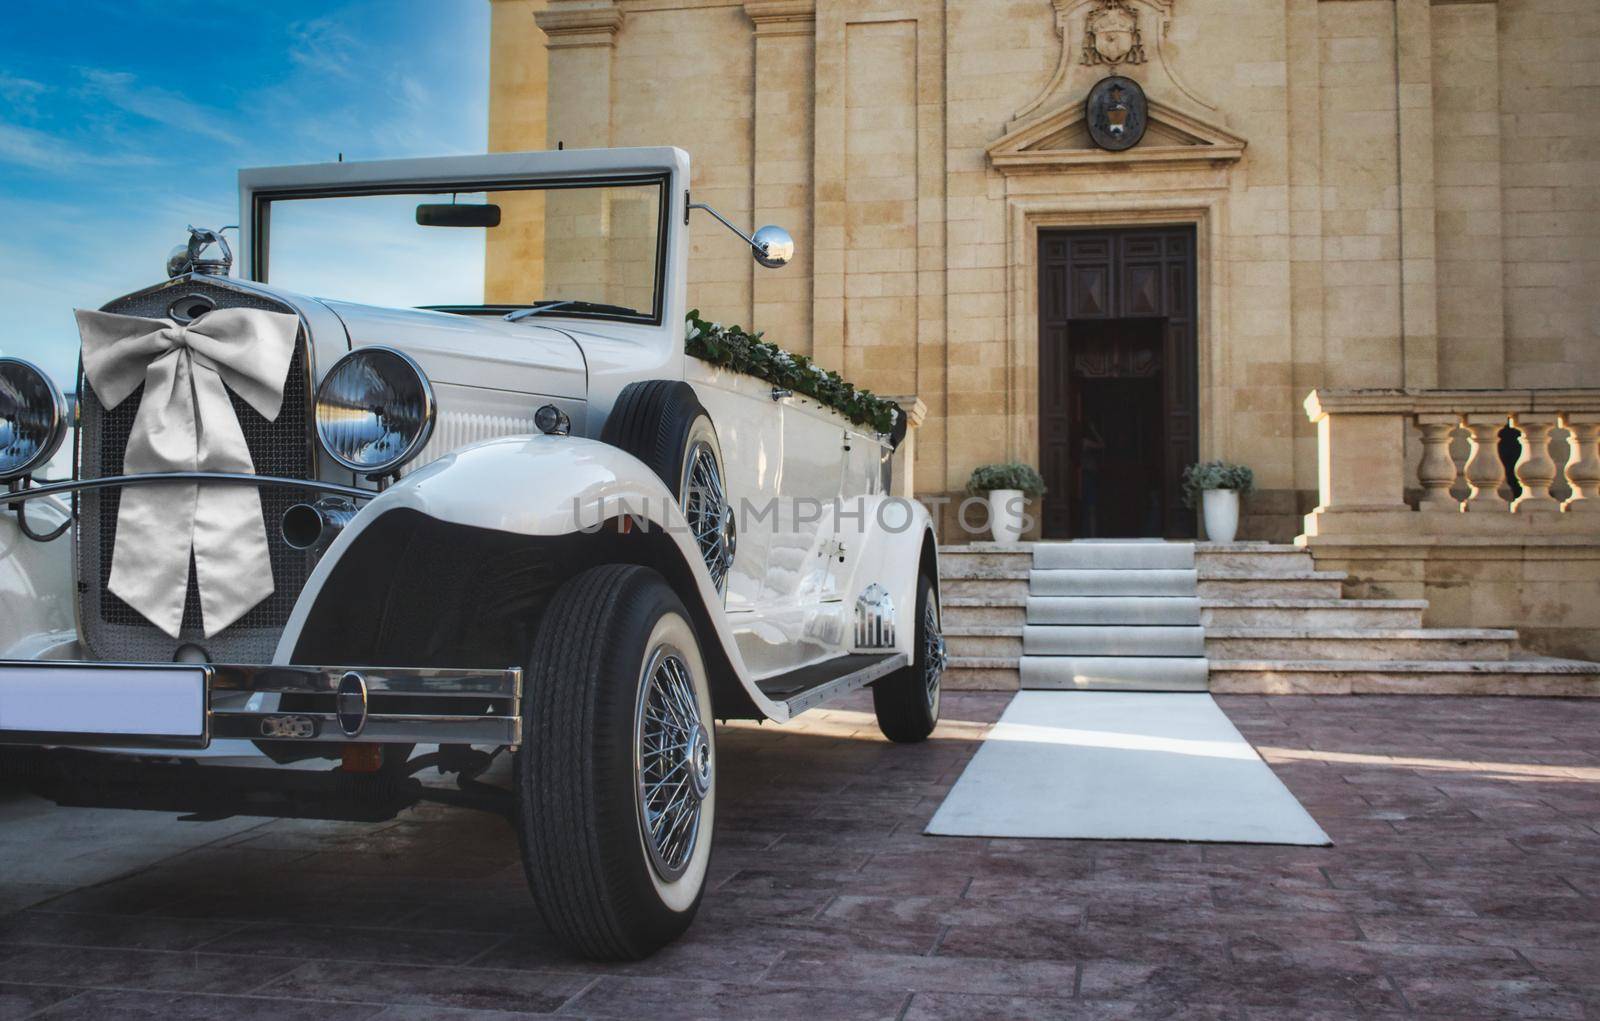 Qarb / Malta - November 24 2019: White classic car for a traditional wedding in front of a church by tennesseewitney